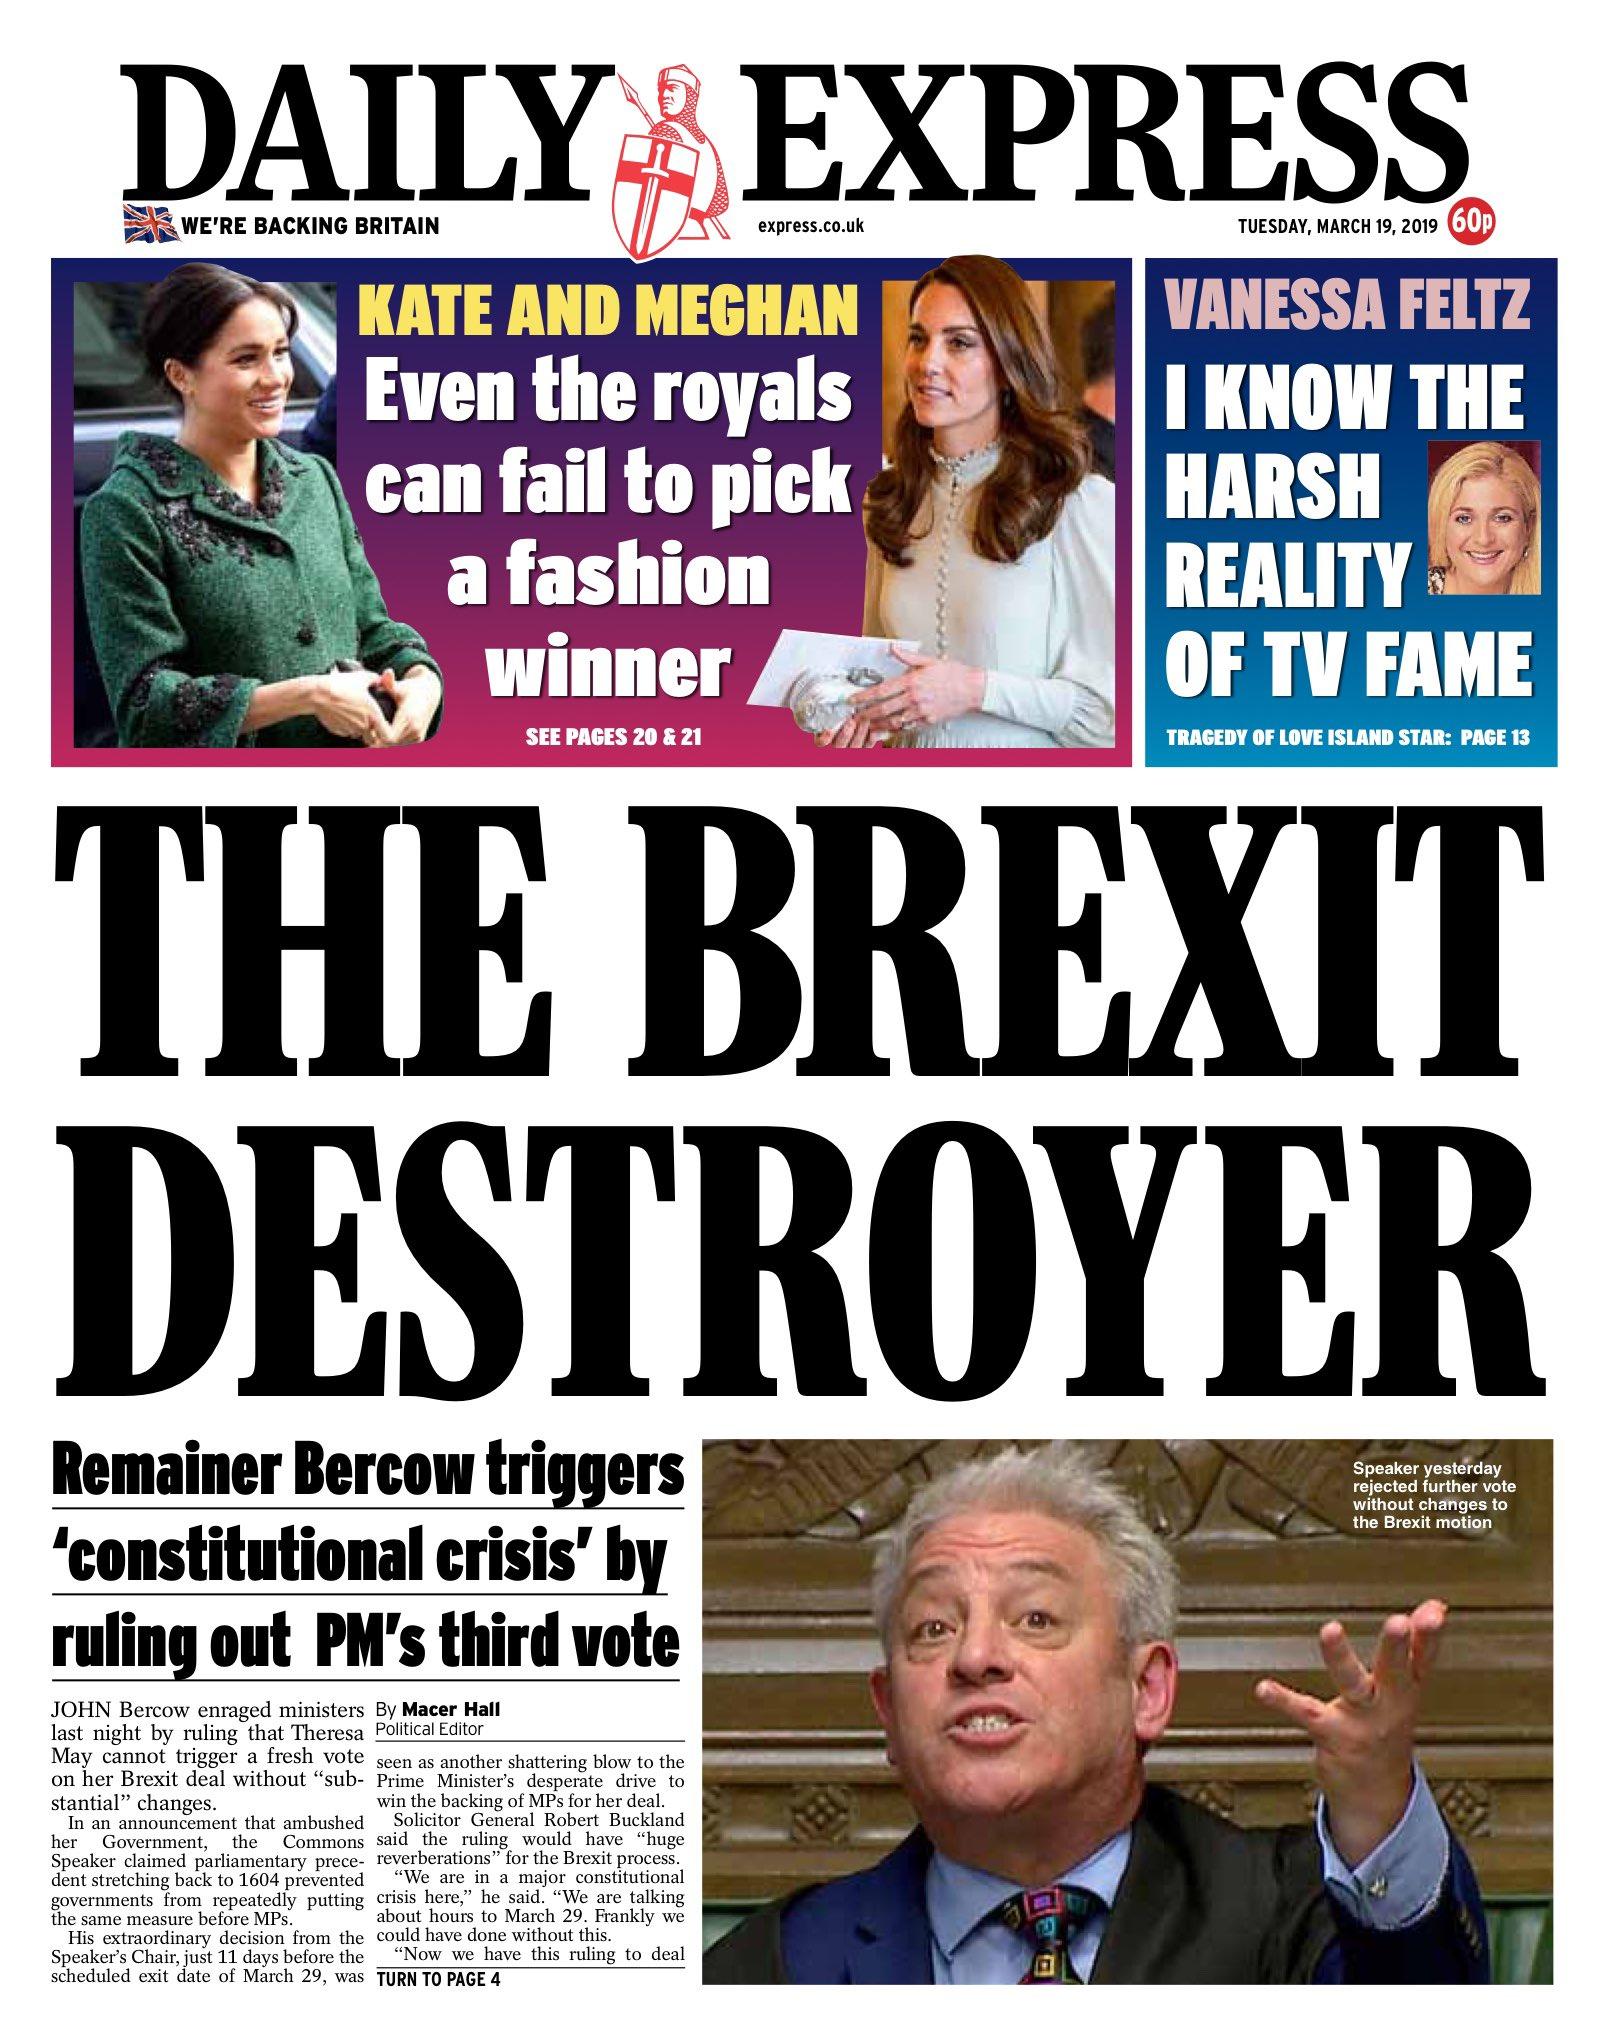 Daily Express. 